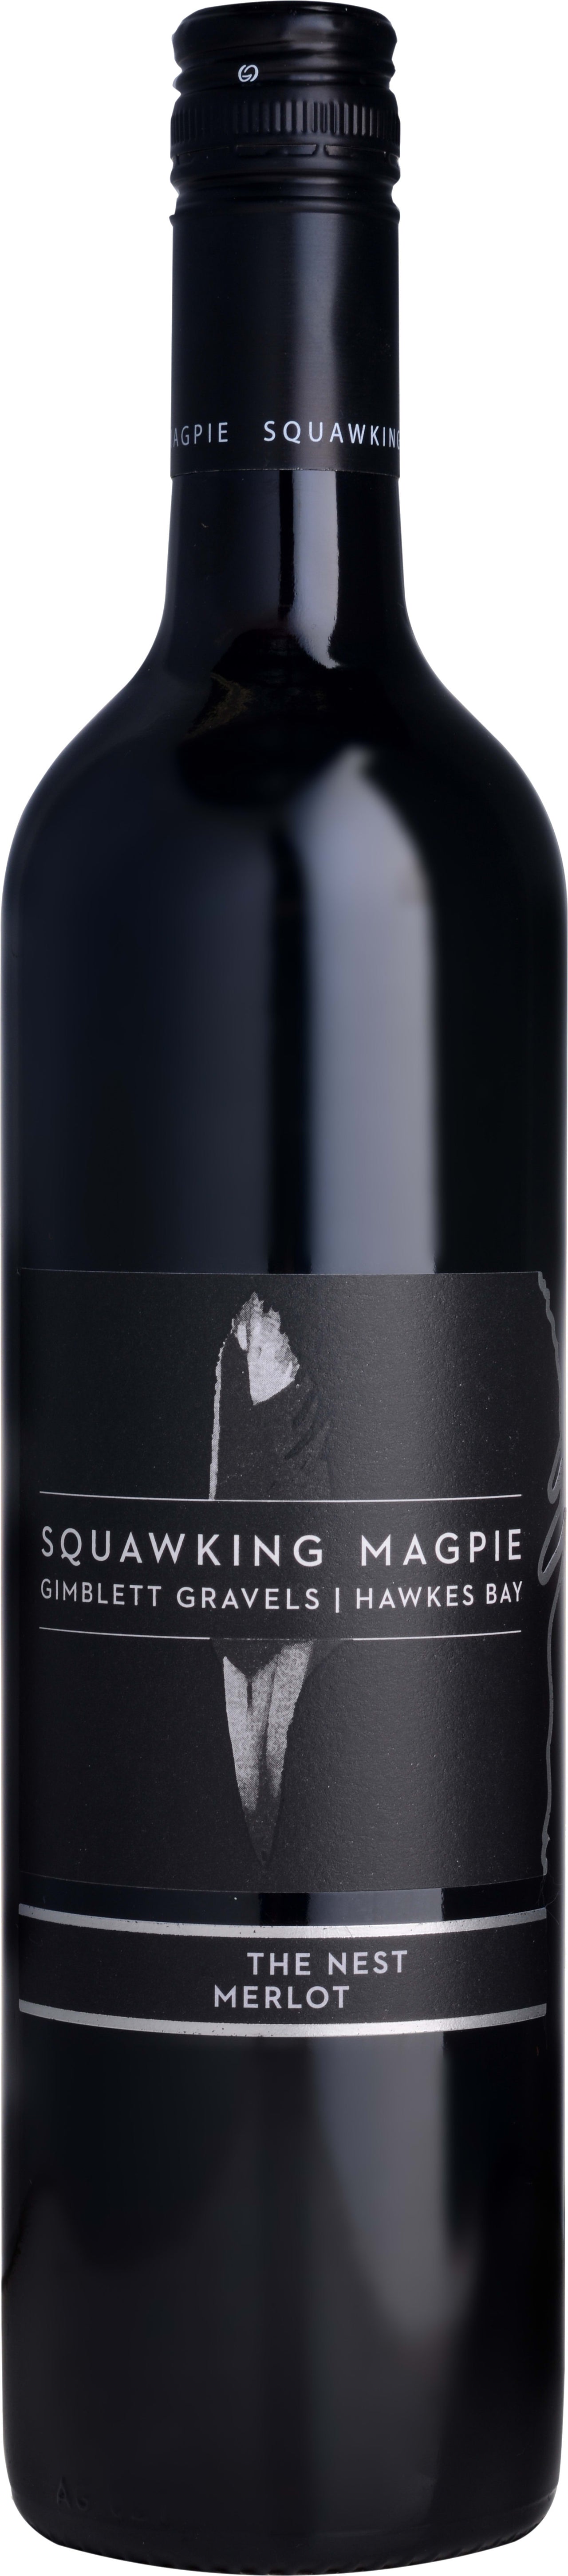 Squawking Magpie The Nest Merlot 2015 75cl - Buy Squawking Magpie Wines from GREAT WINES DIRECT wine shop